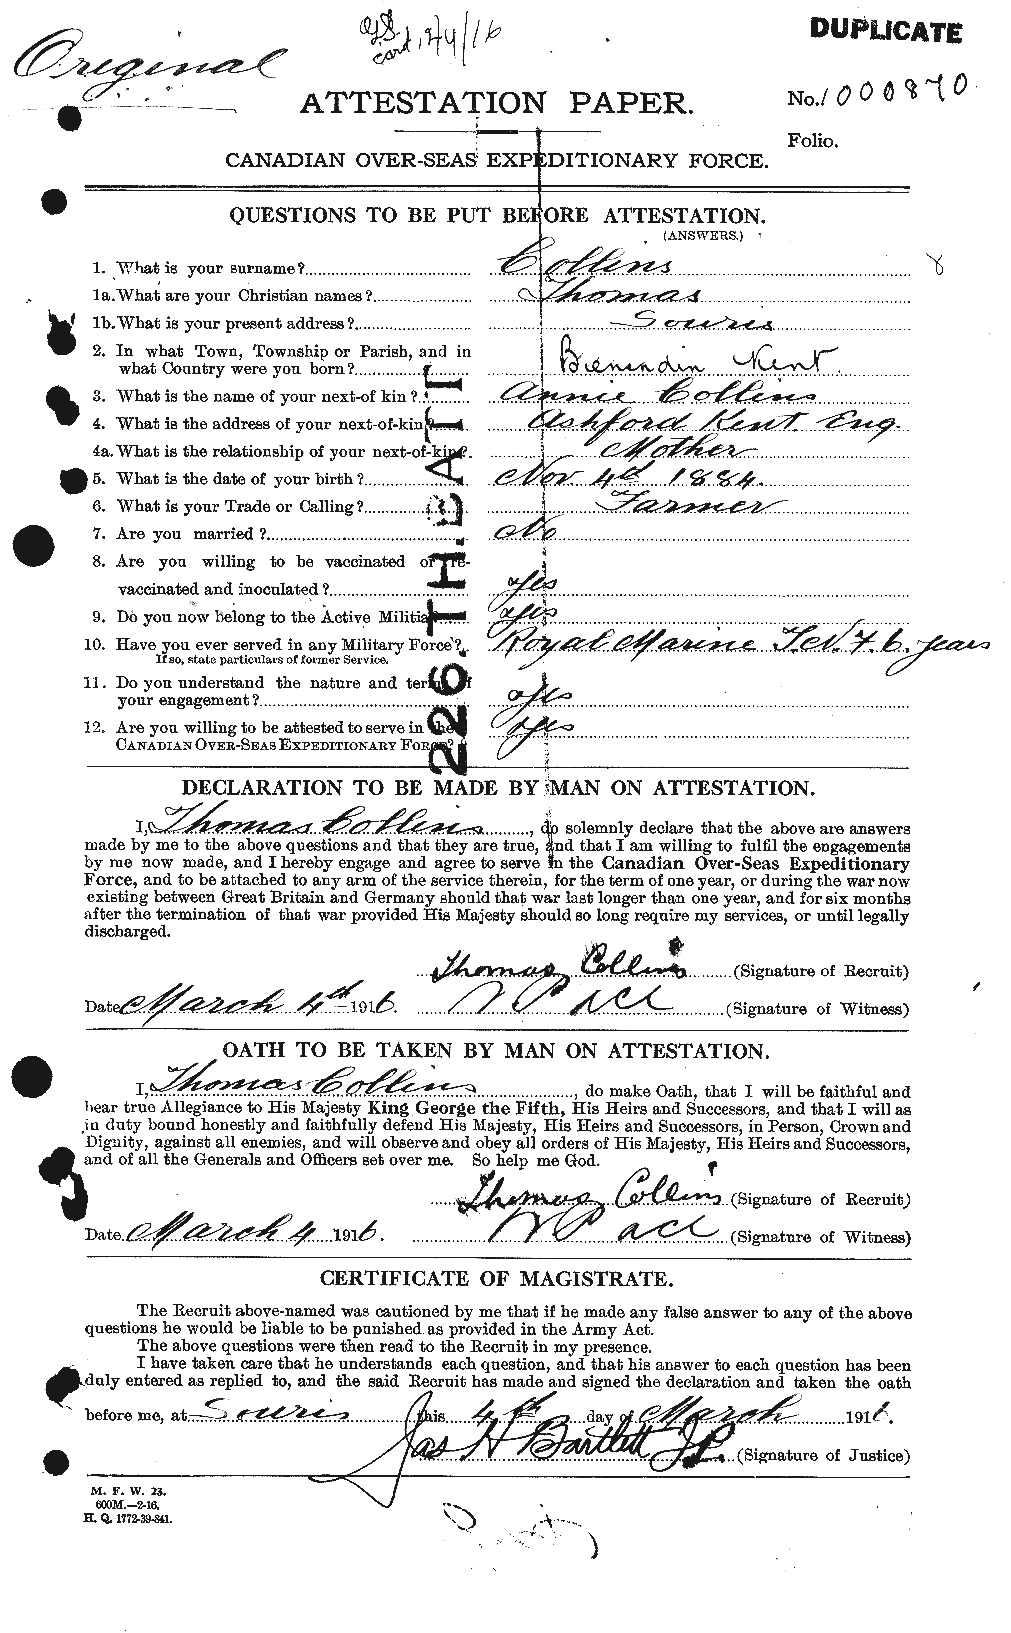 Personnel Records of the First World War - CEF 069138a